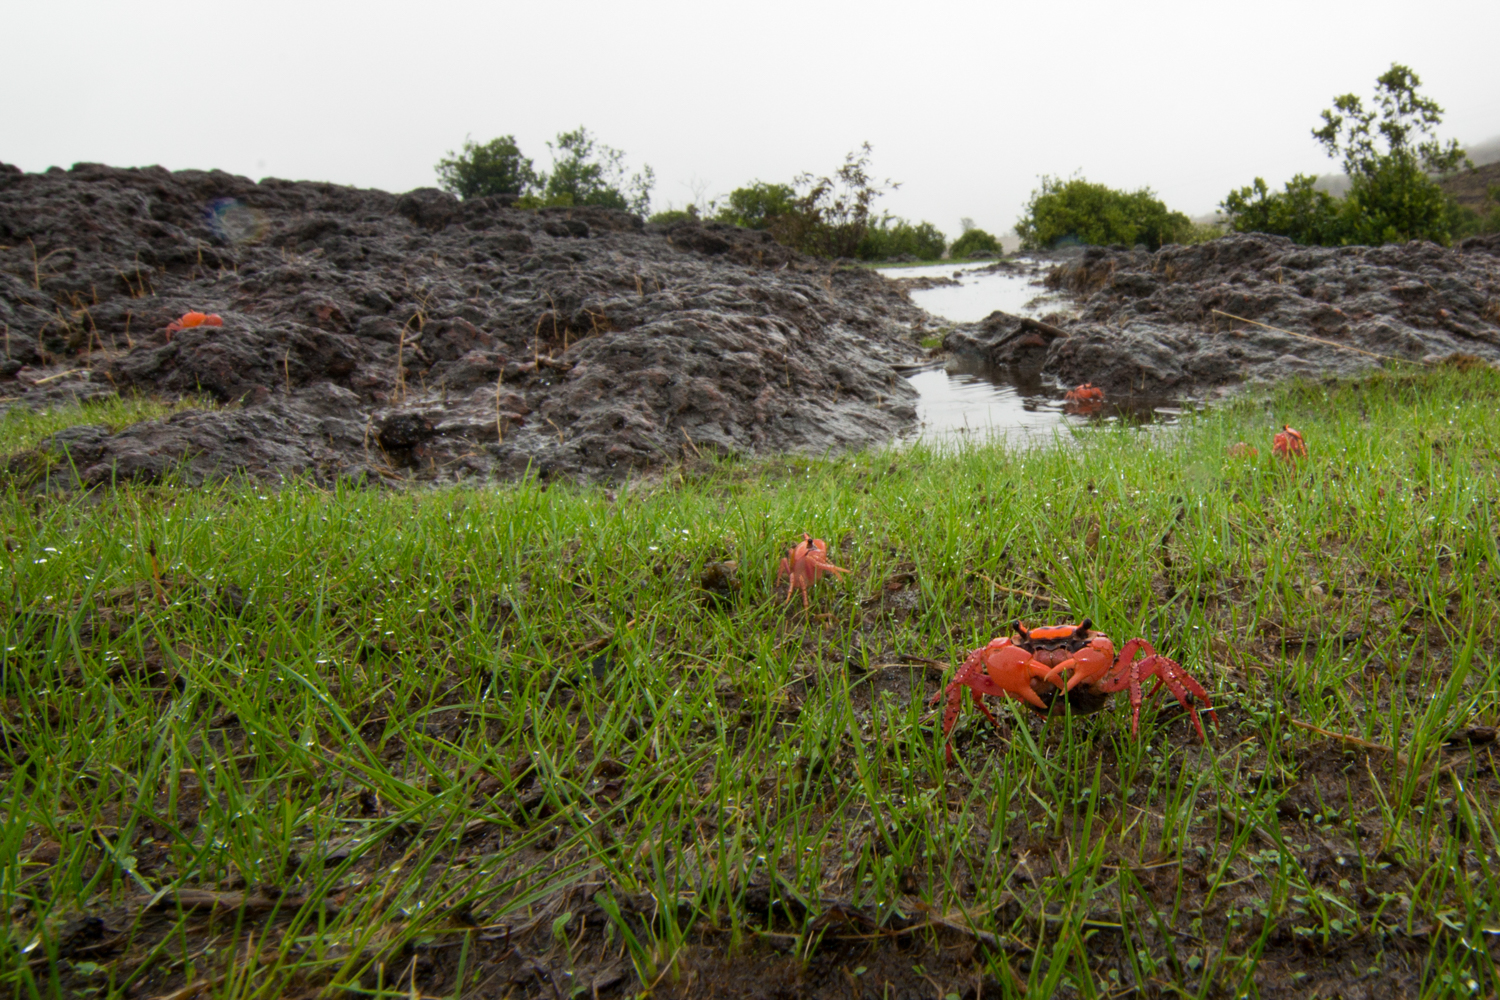  Crabs such as these remain dormant in the dry summer season. With the first rains, they emerge to feed and breed around these temporary pools. 